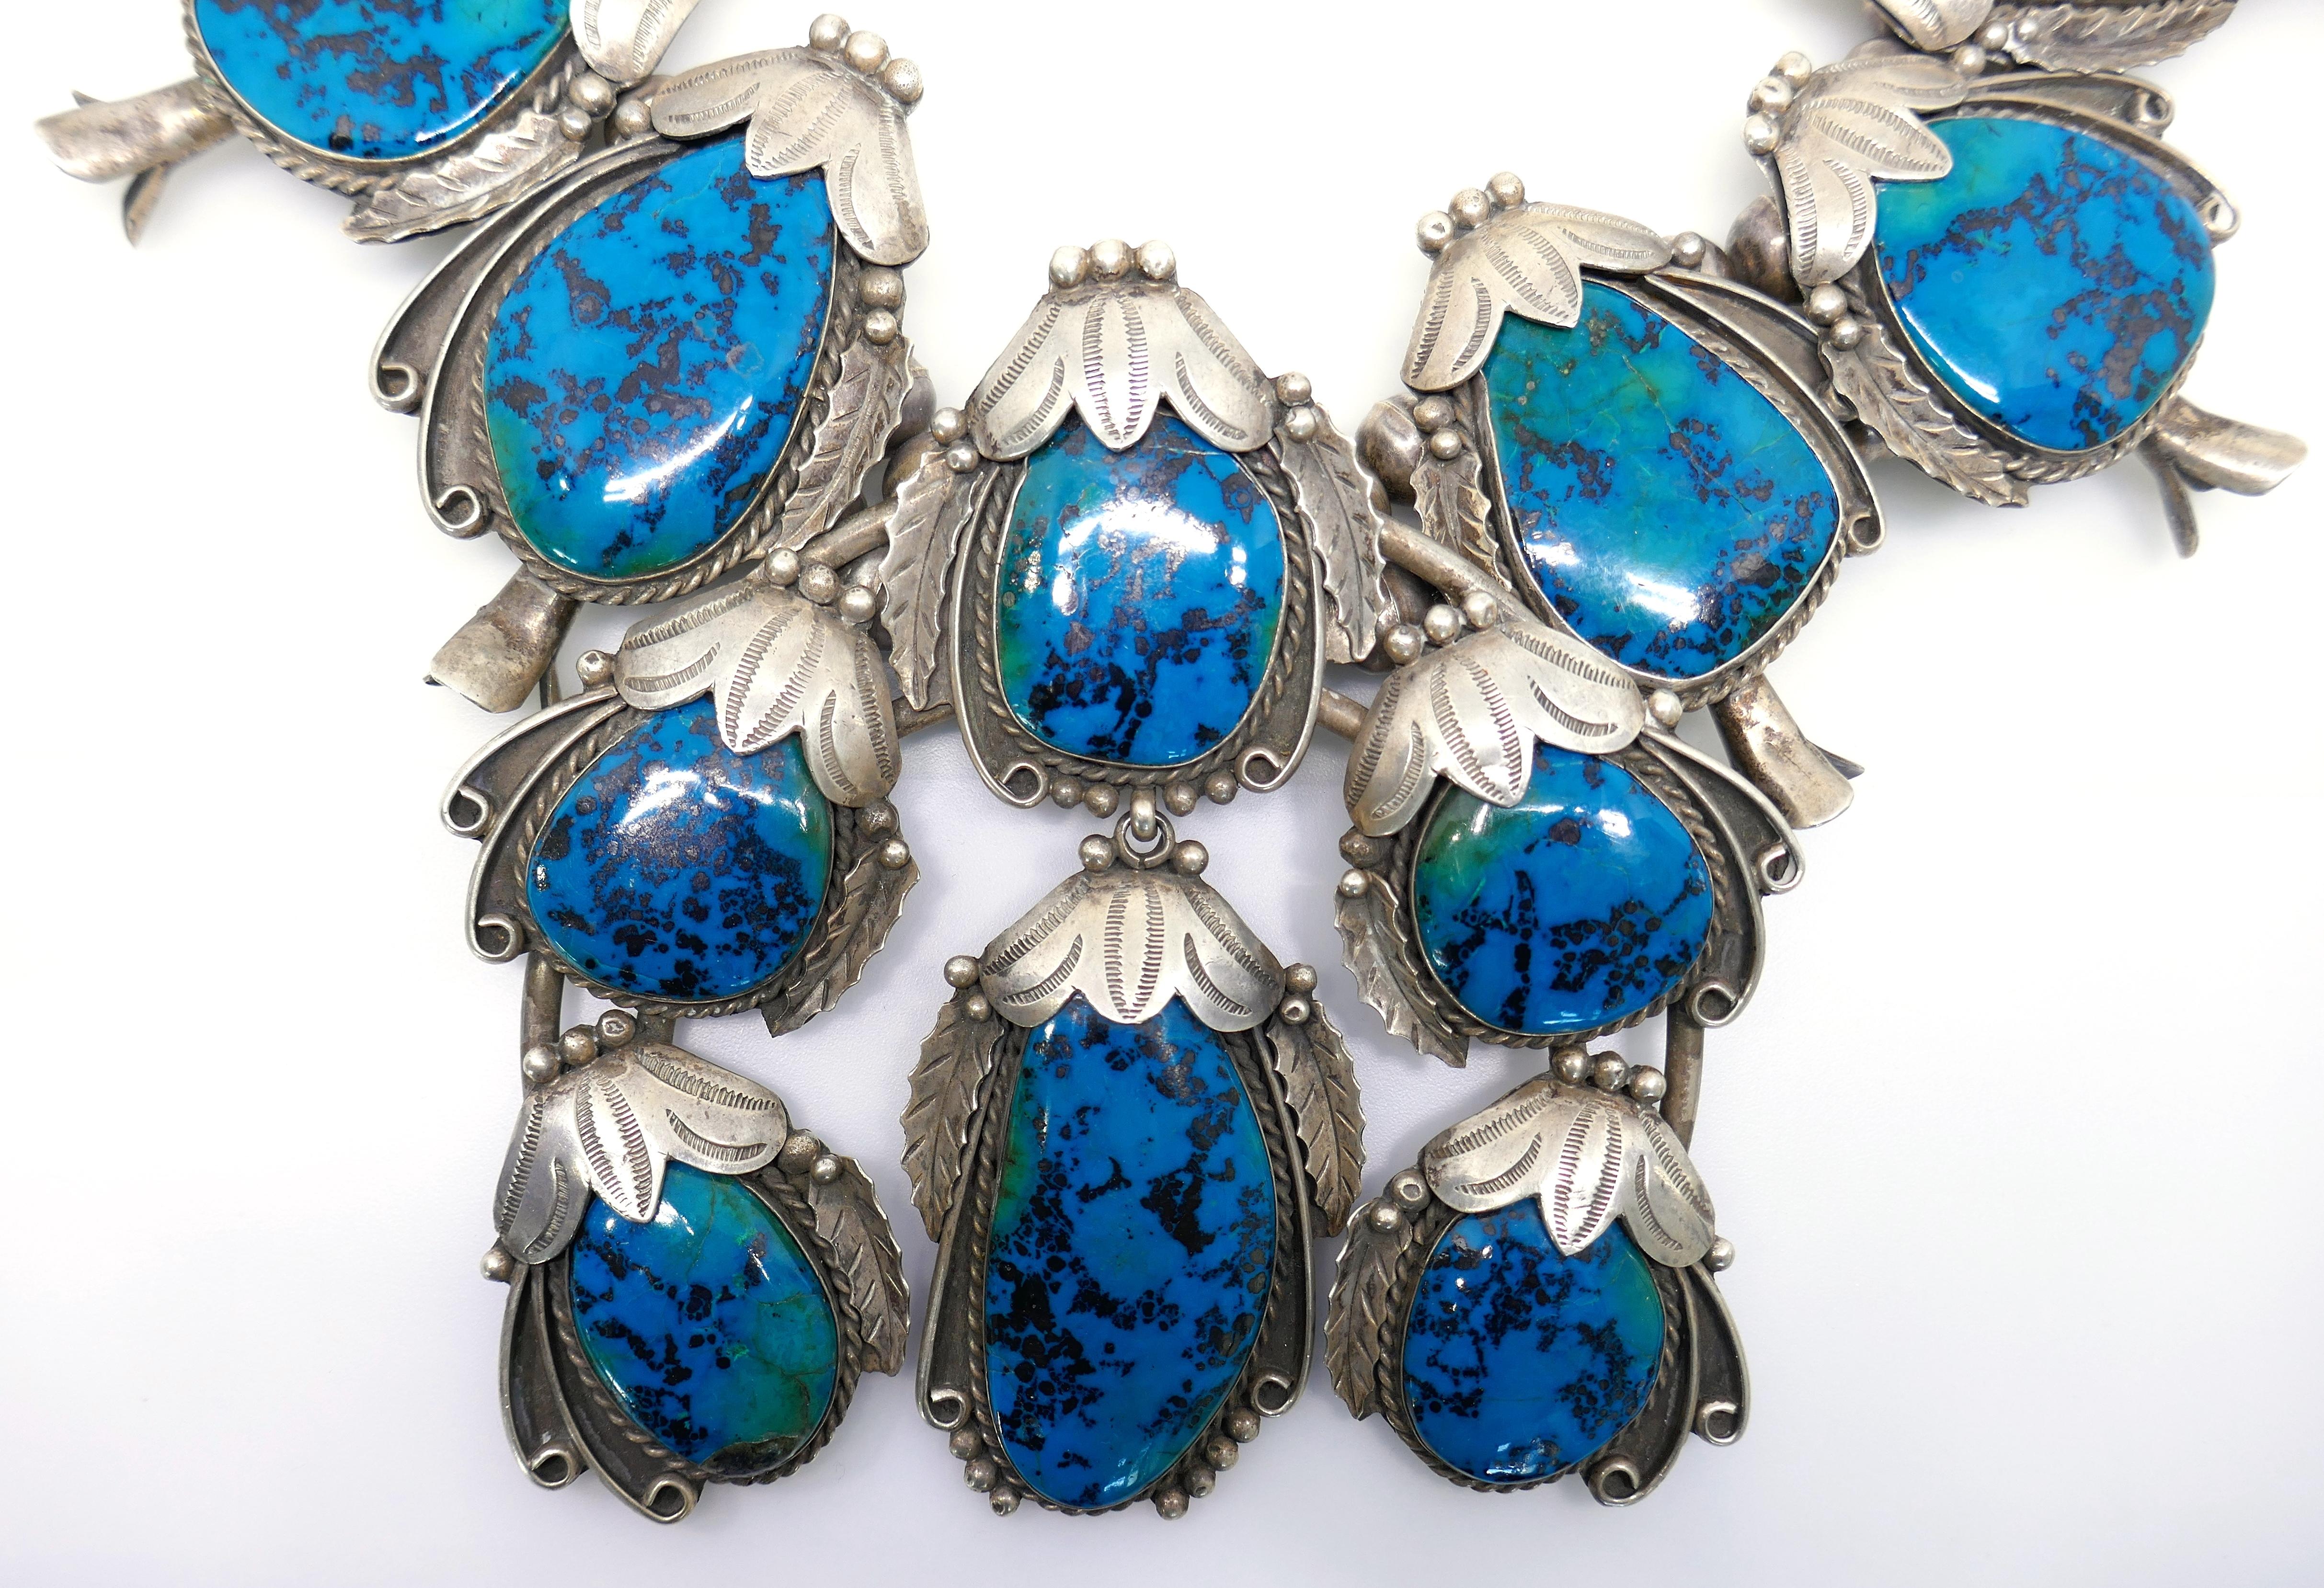 Native American Turquoise Silver Squash Blossom Necklace by Lonnie Miller Navajo 1970s Awarded